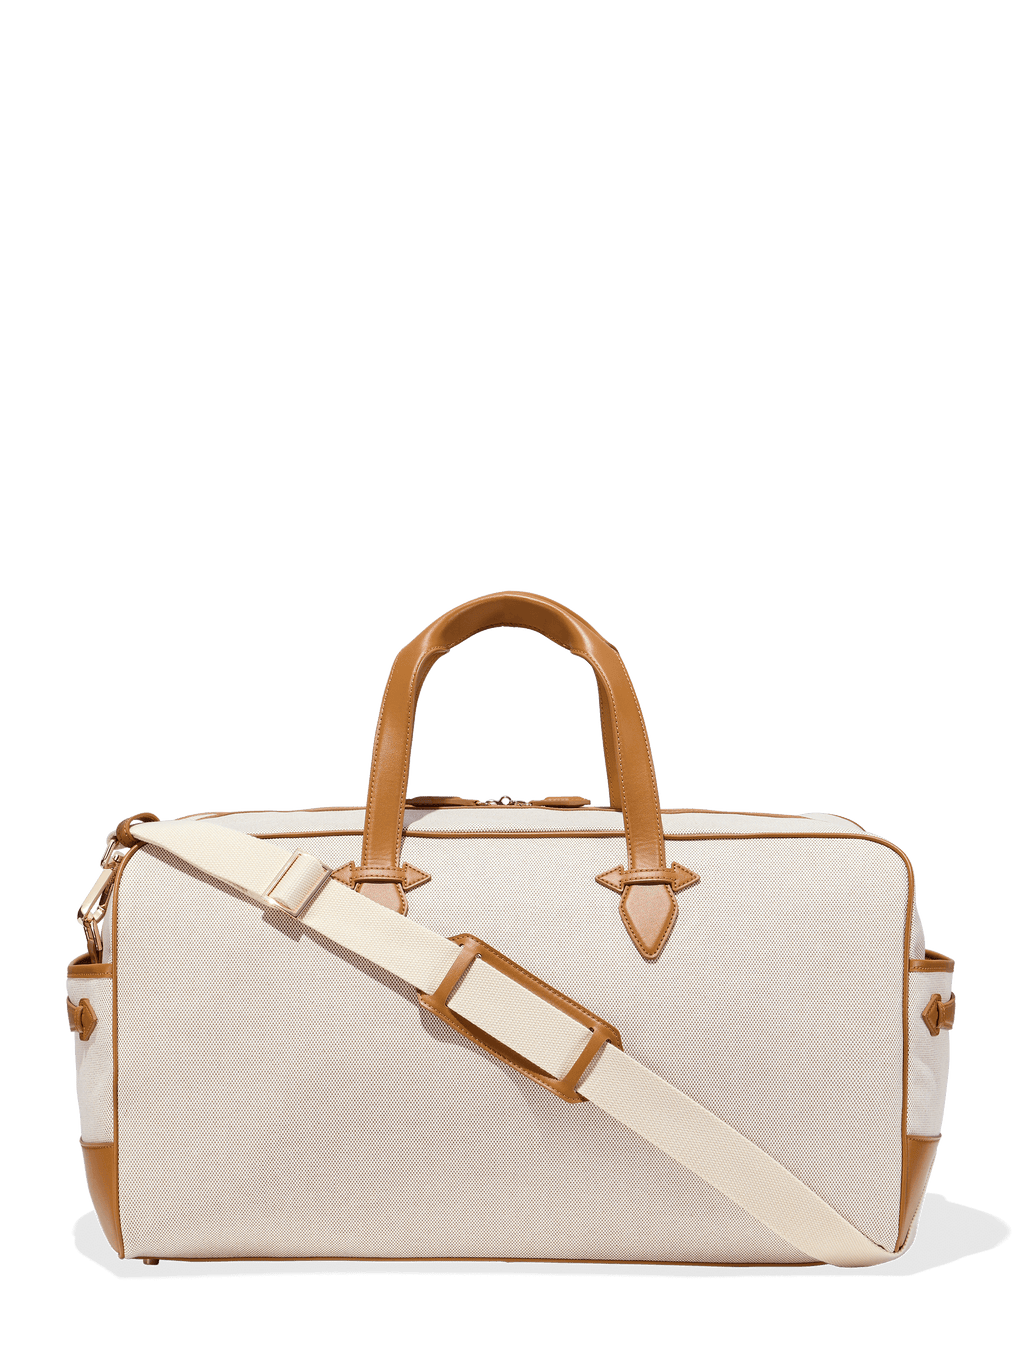 The Grand Tour: Luxurious Summer Travel Accessories